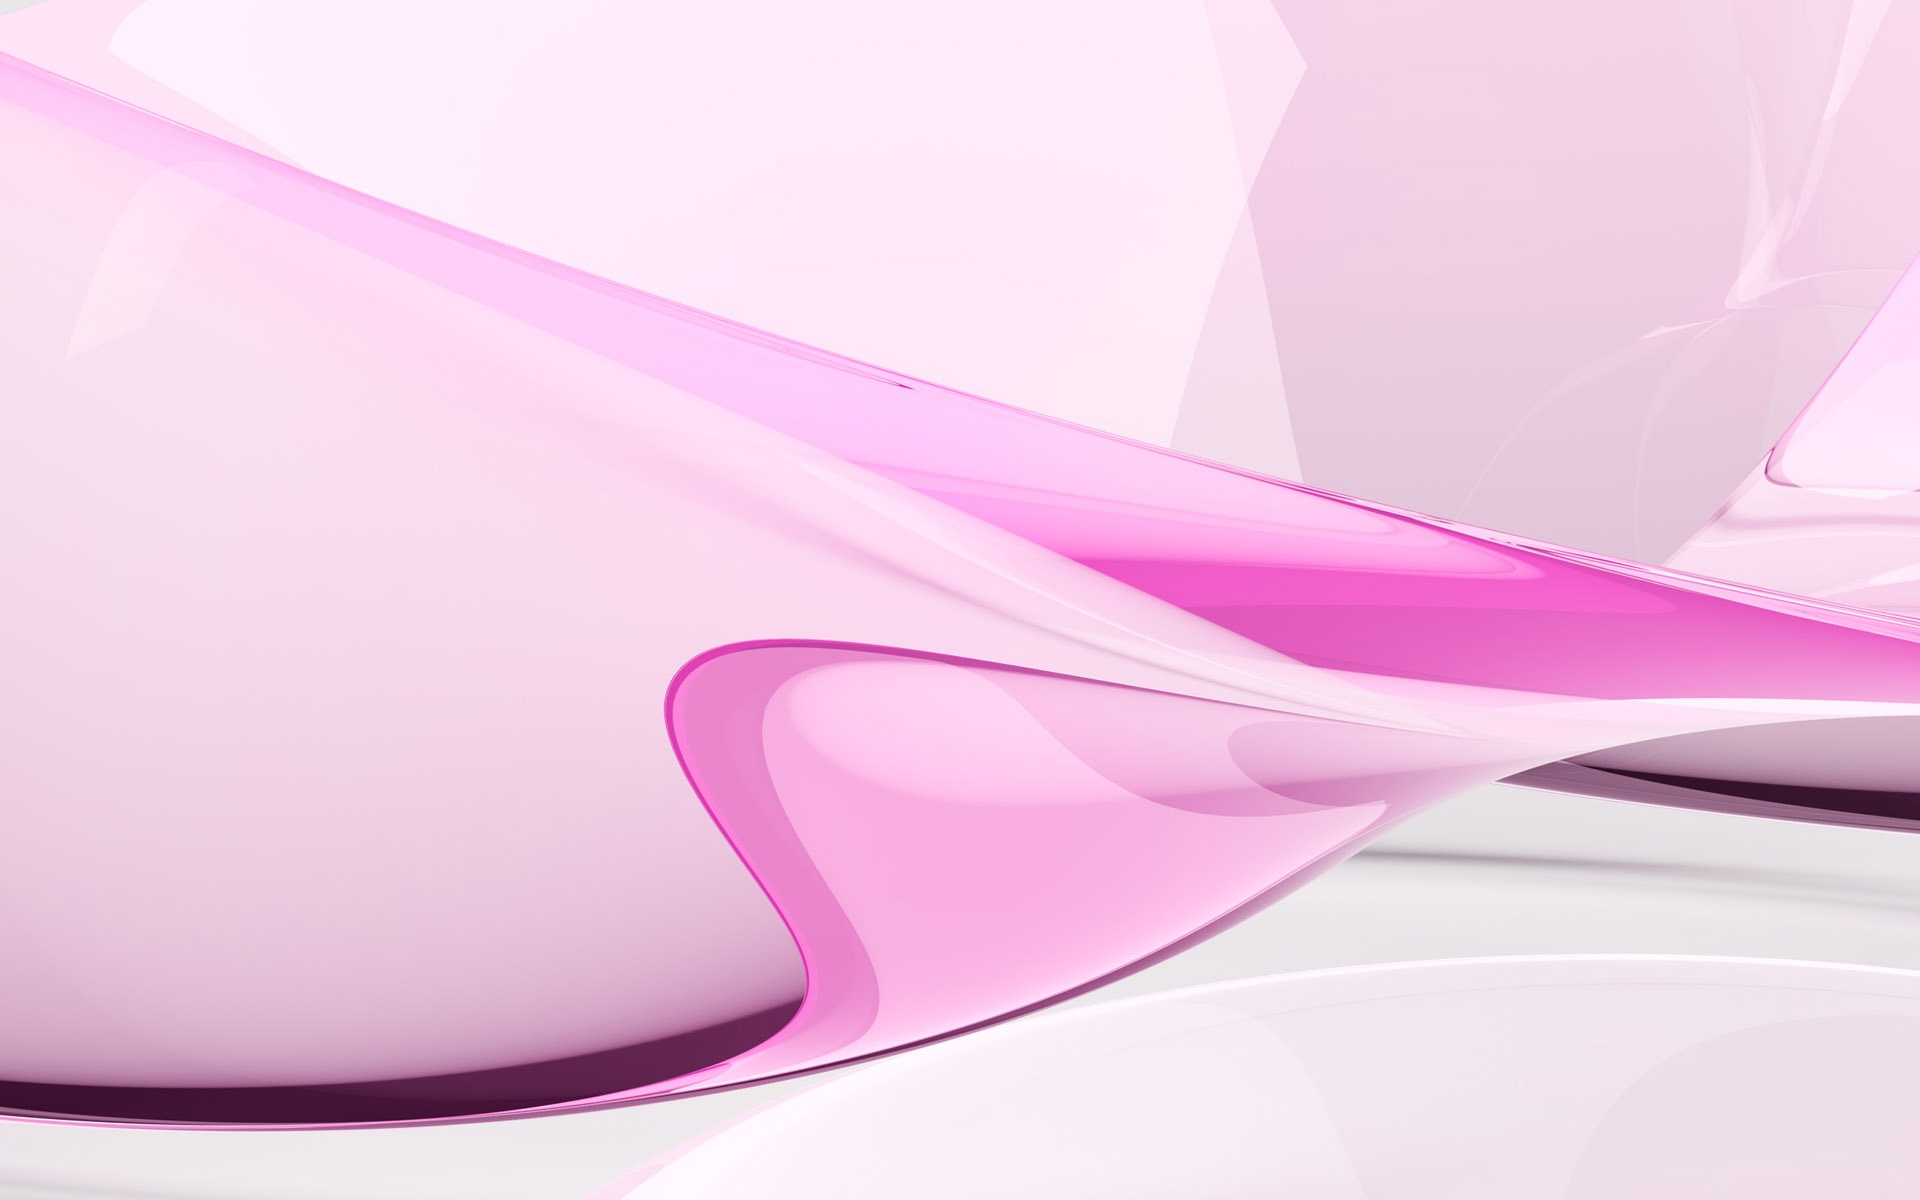 Pink Abstract Wave Wallpaper 28406